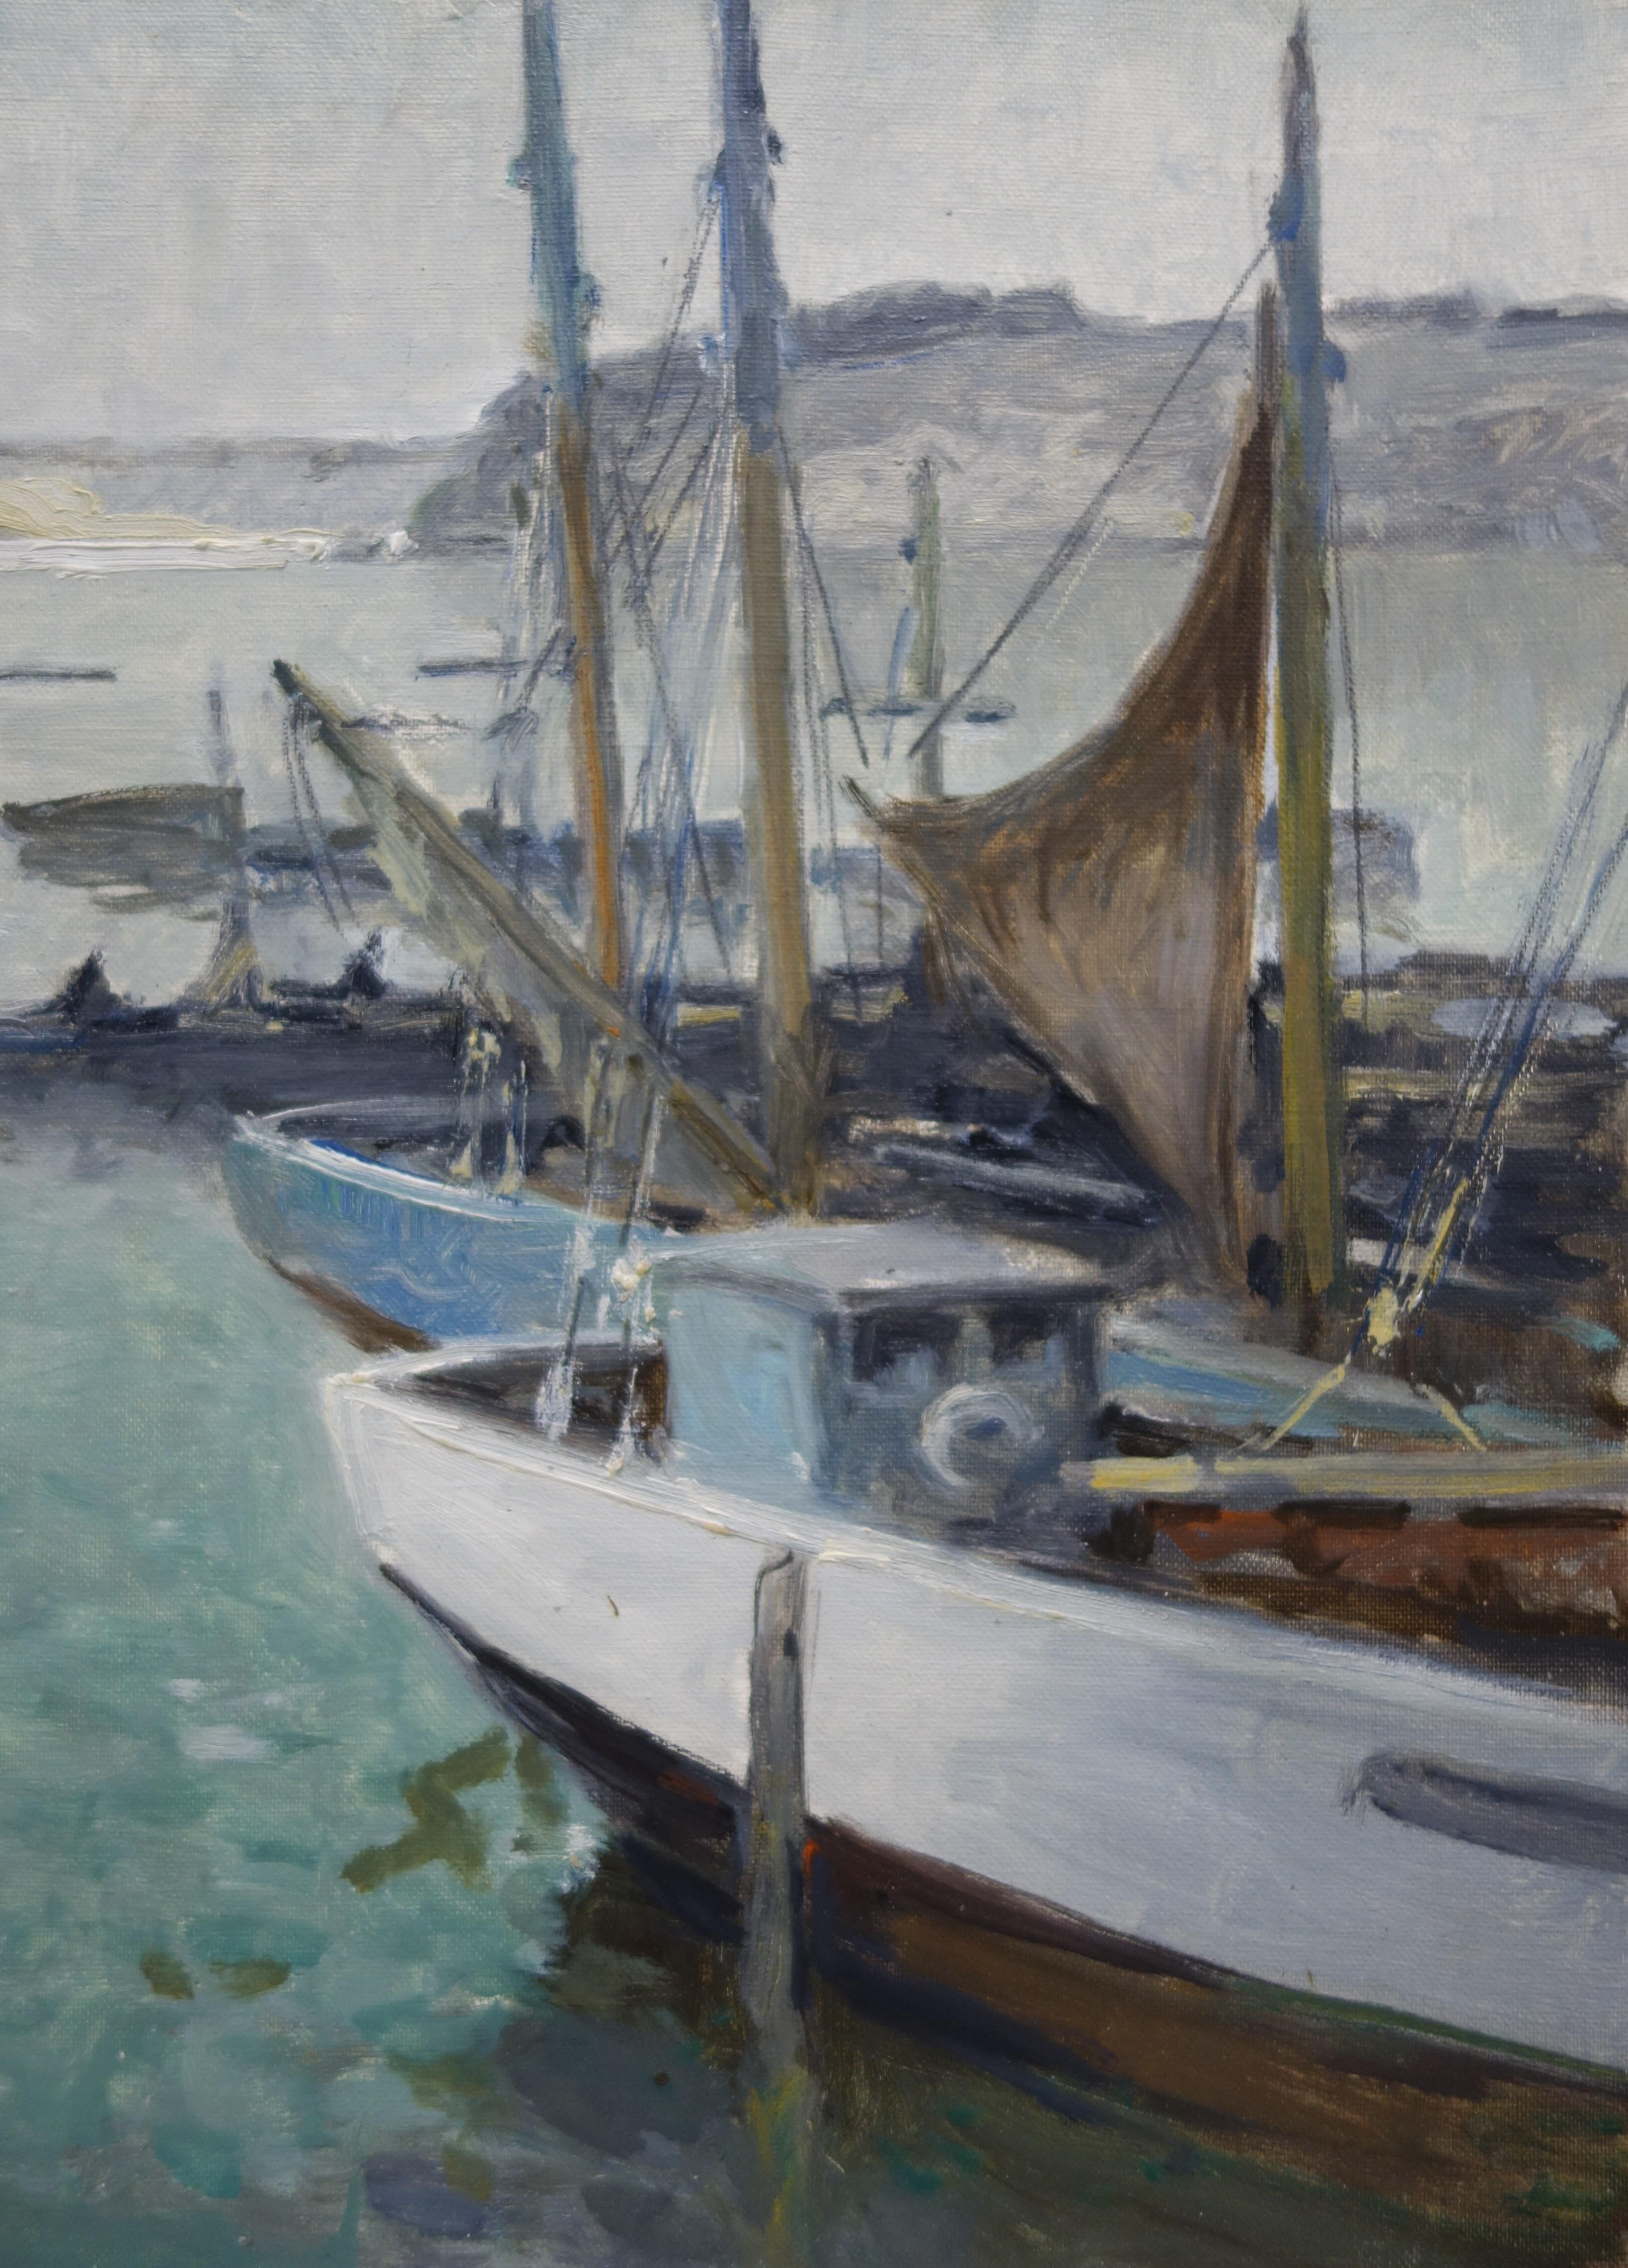 Sea, Harbor, Boats, Sailboats, France, Brittany France, Impressionist, 20th, 1930, Gray, Blue, Celestial

Henry Maurice CAHOURS (Paris, 1889 –  Vence, 1974)

He was born in Paris but spent his childhood and adolescence in Amiens, where he attended